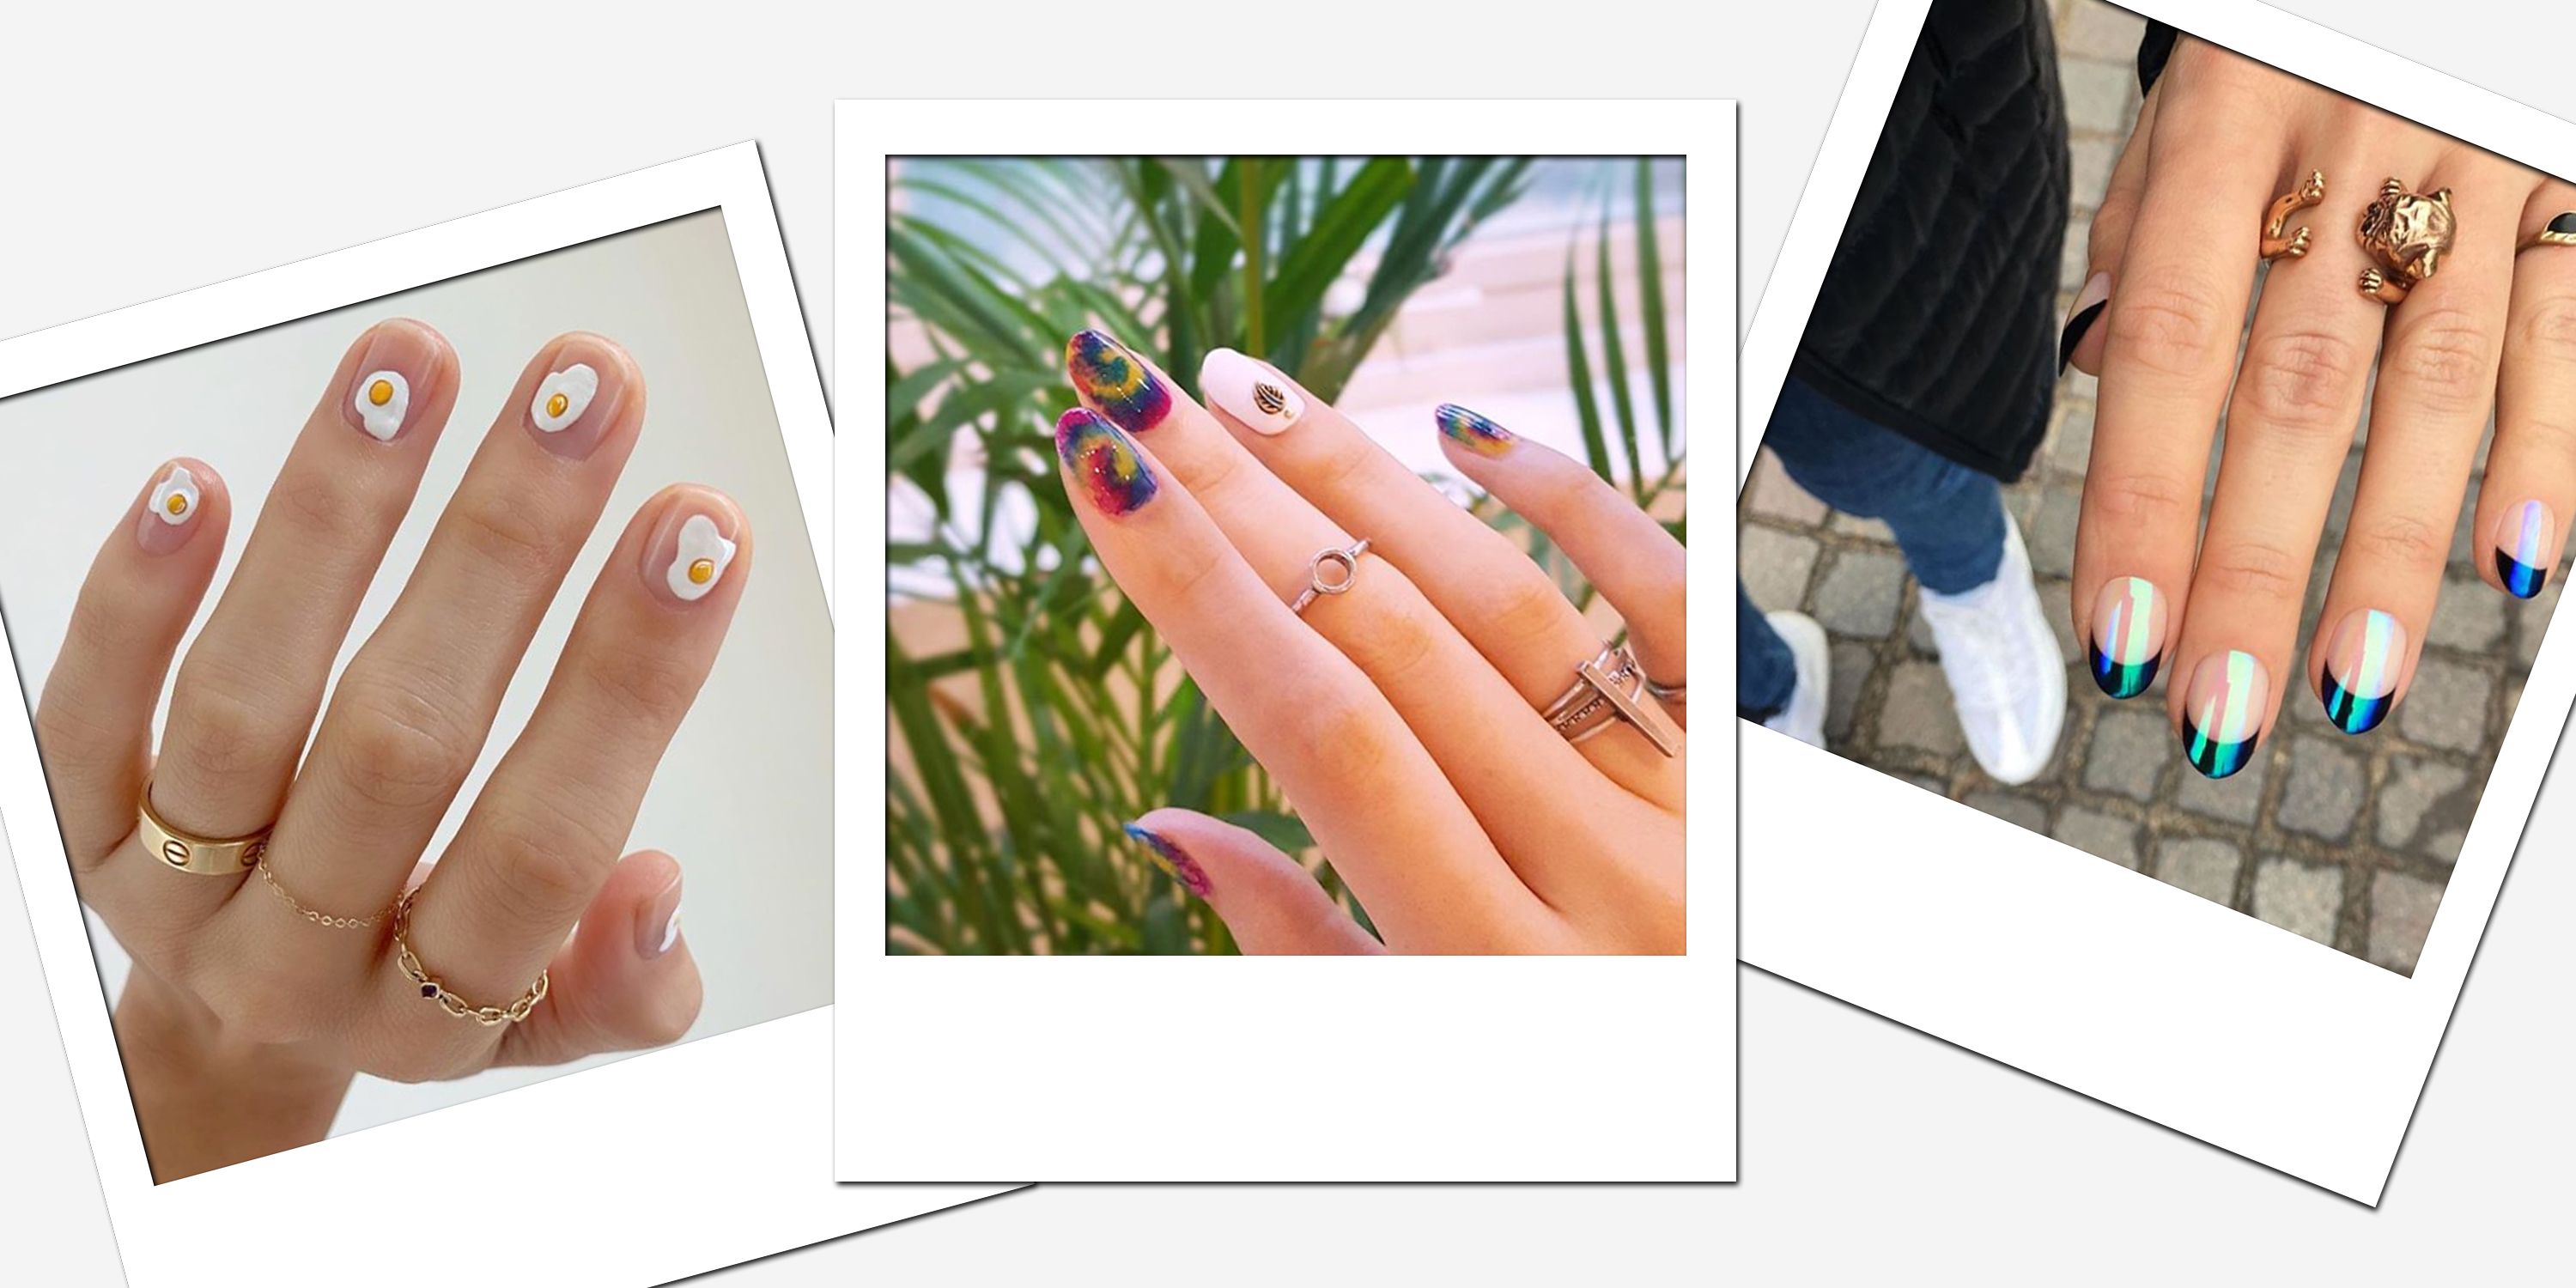 2019 Grammy Awards Nail Trends: Nude Shades & Lots of Sparkle -  Behindthechair.com